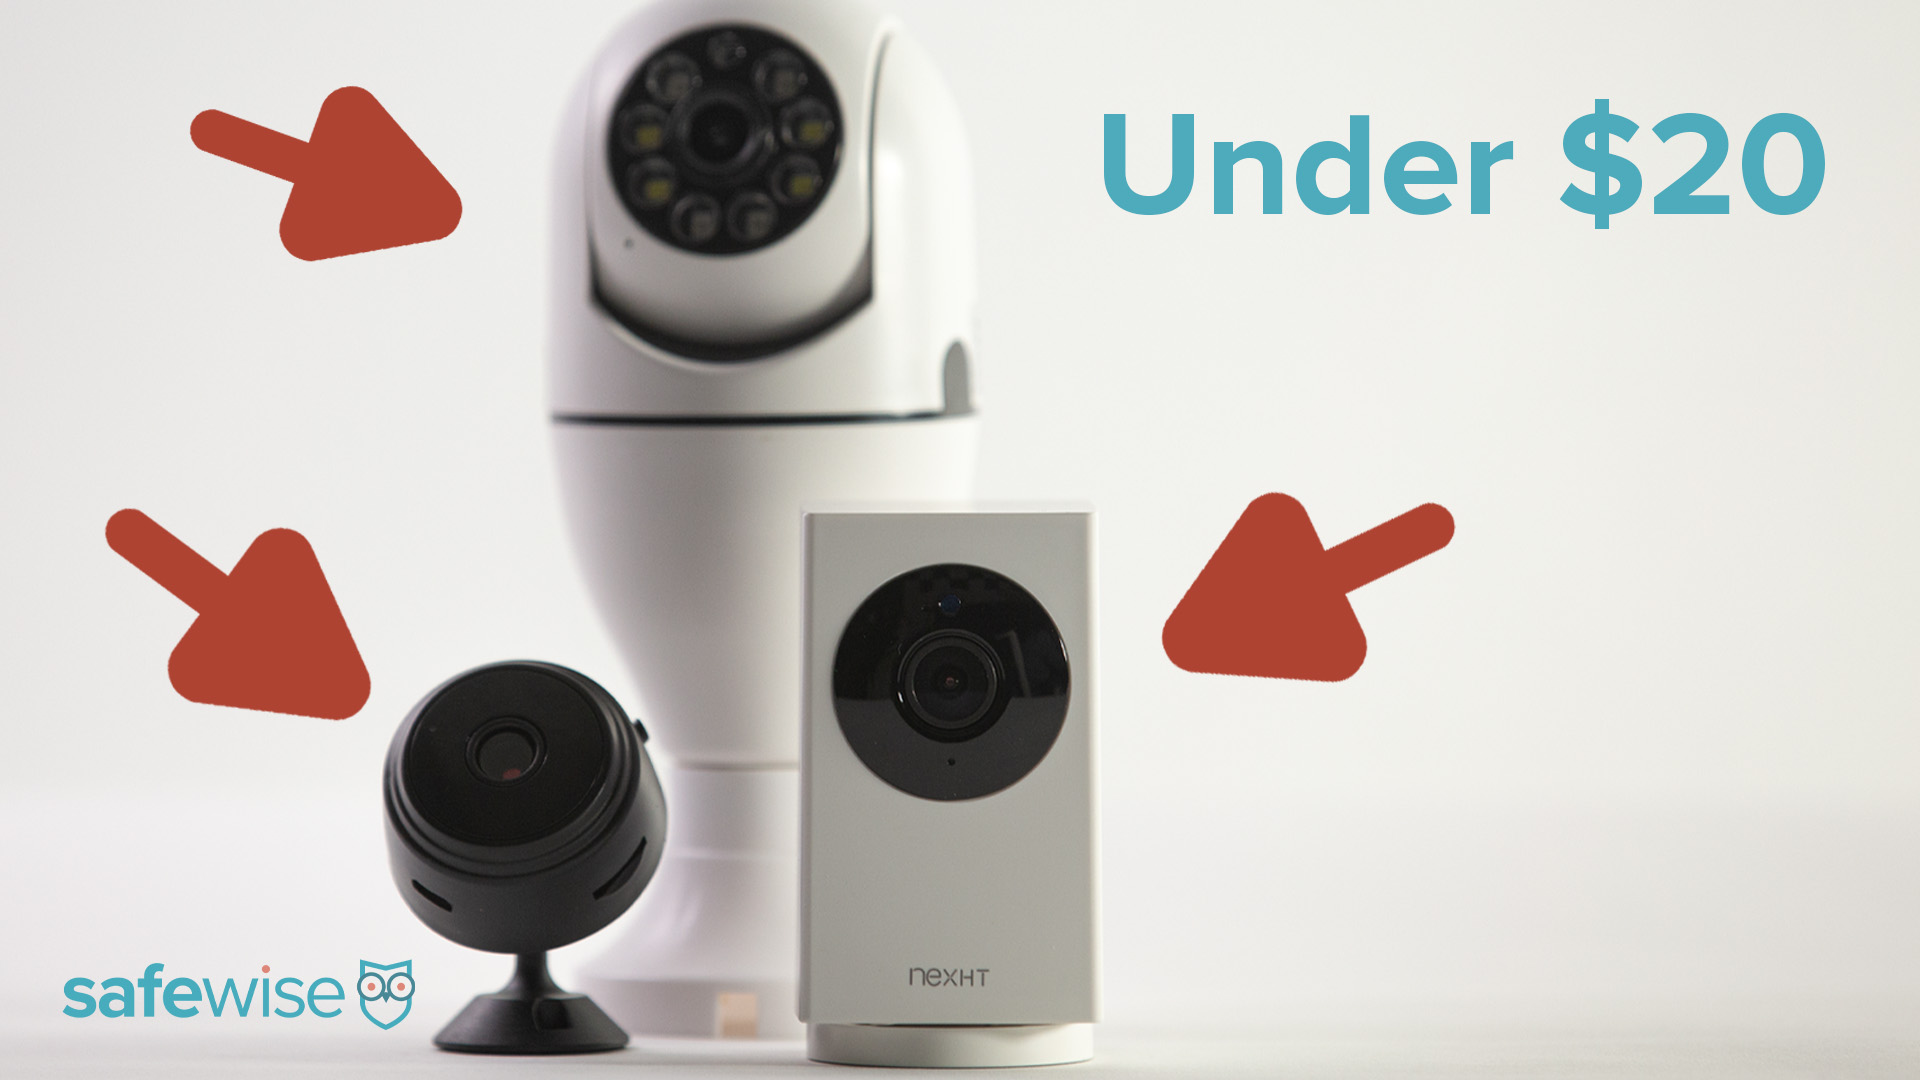 wansview Cameras for Home Security Indoor Baby India